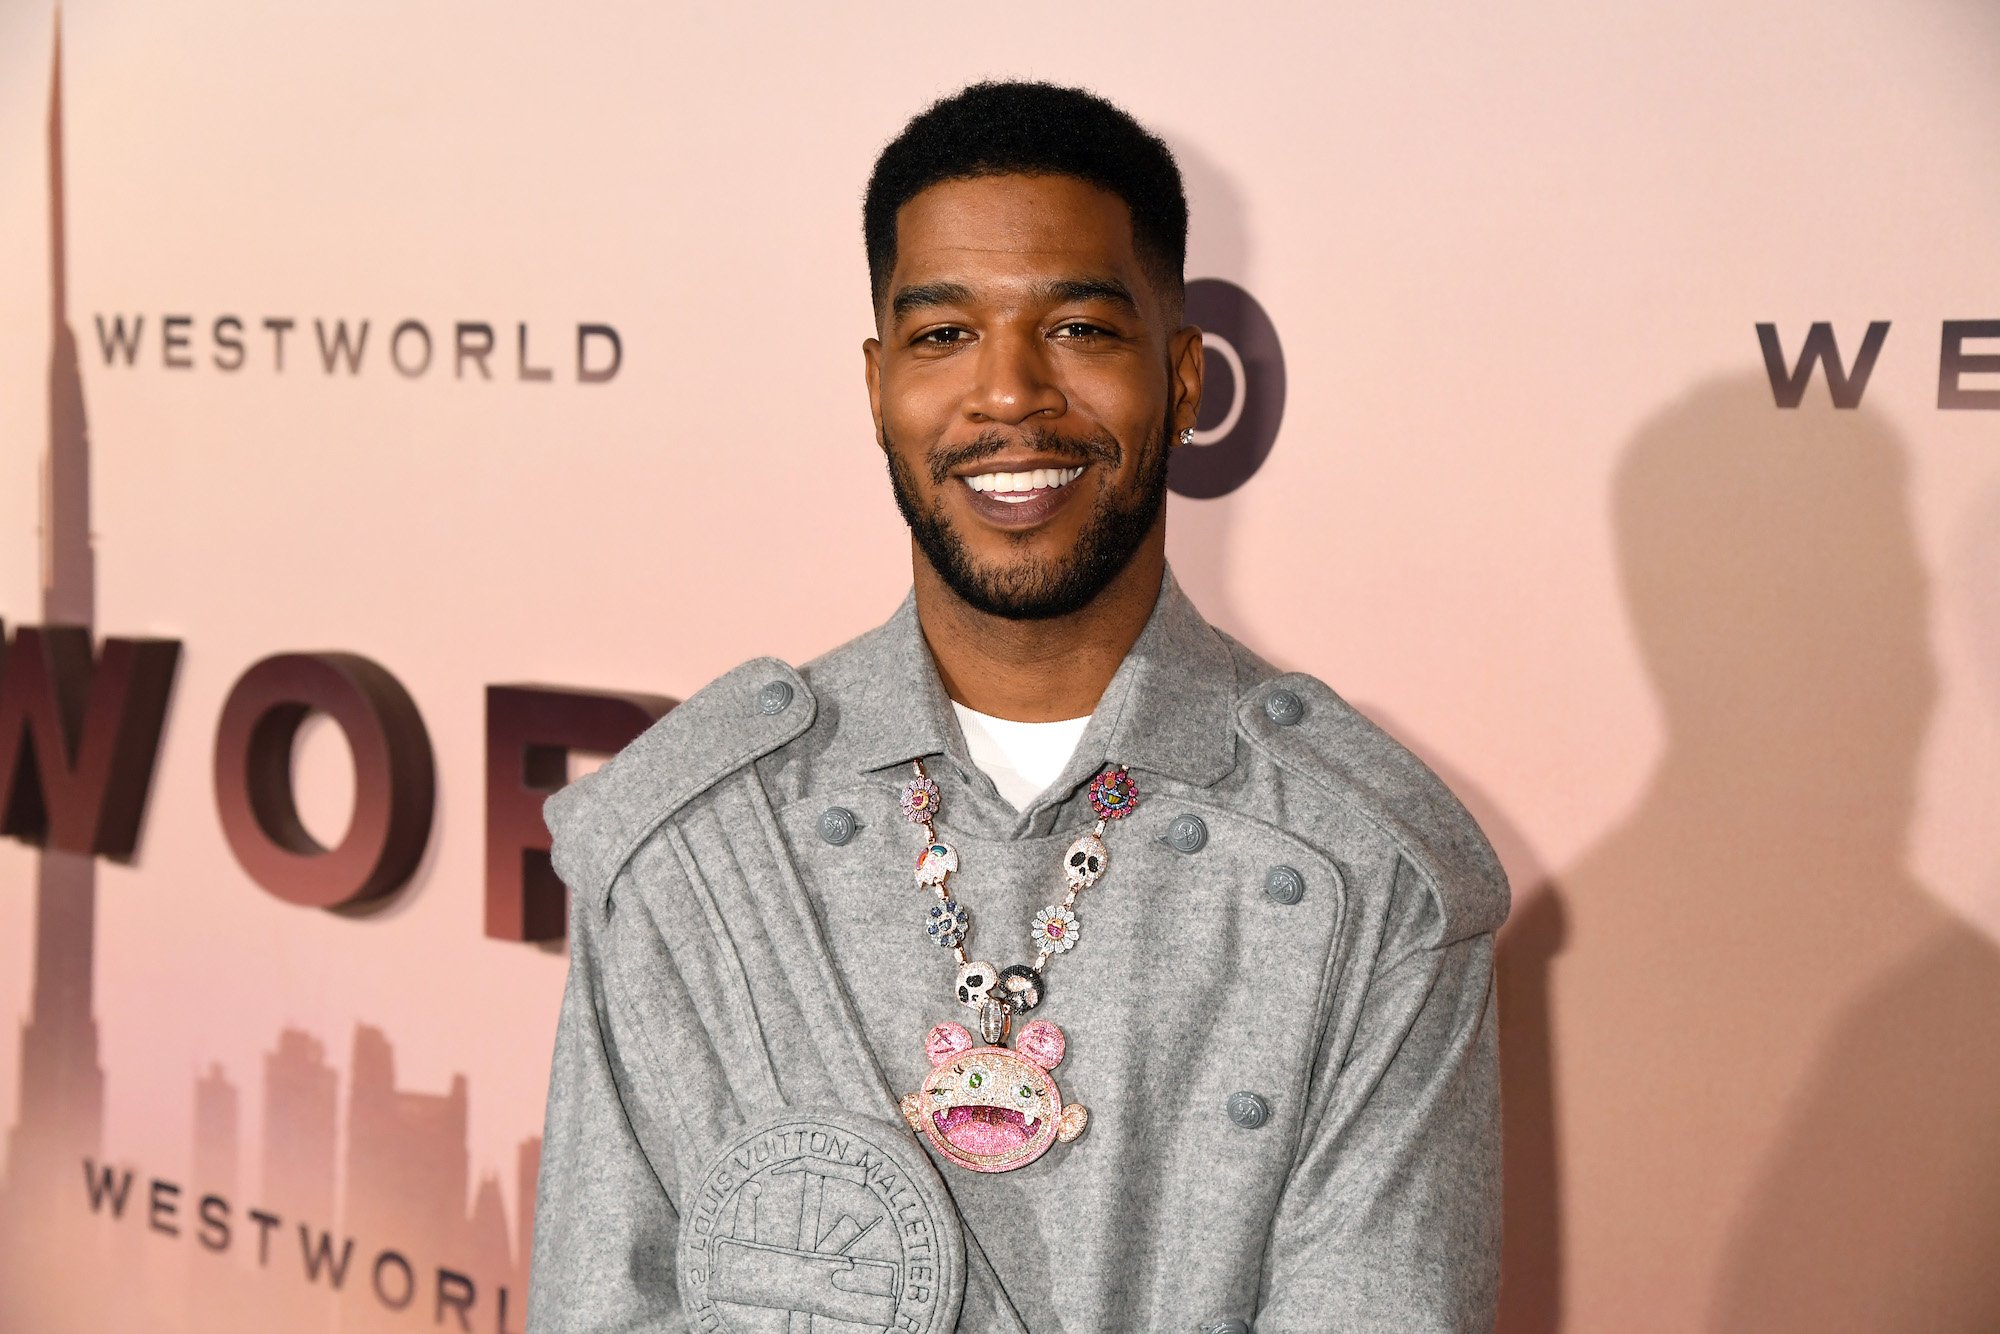 Scott 'Kid Cudi' Mescudi smiling in front of a pink background